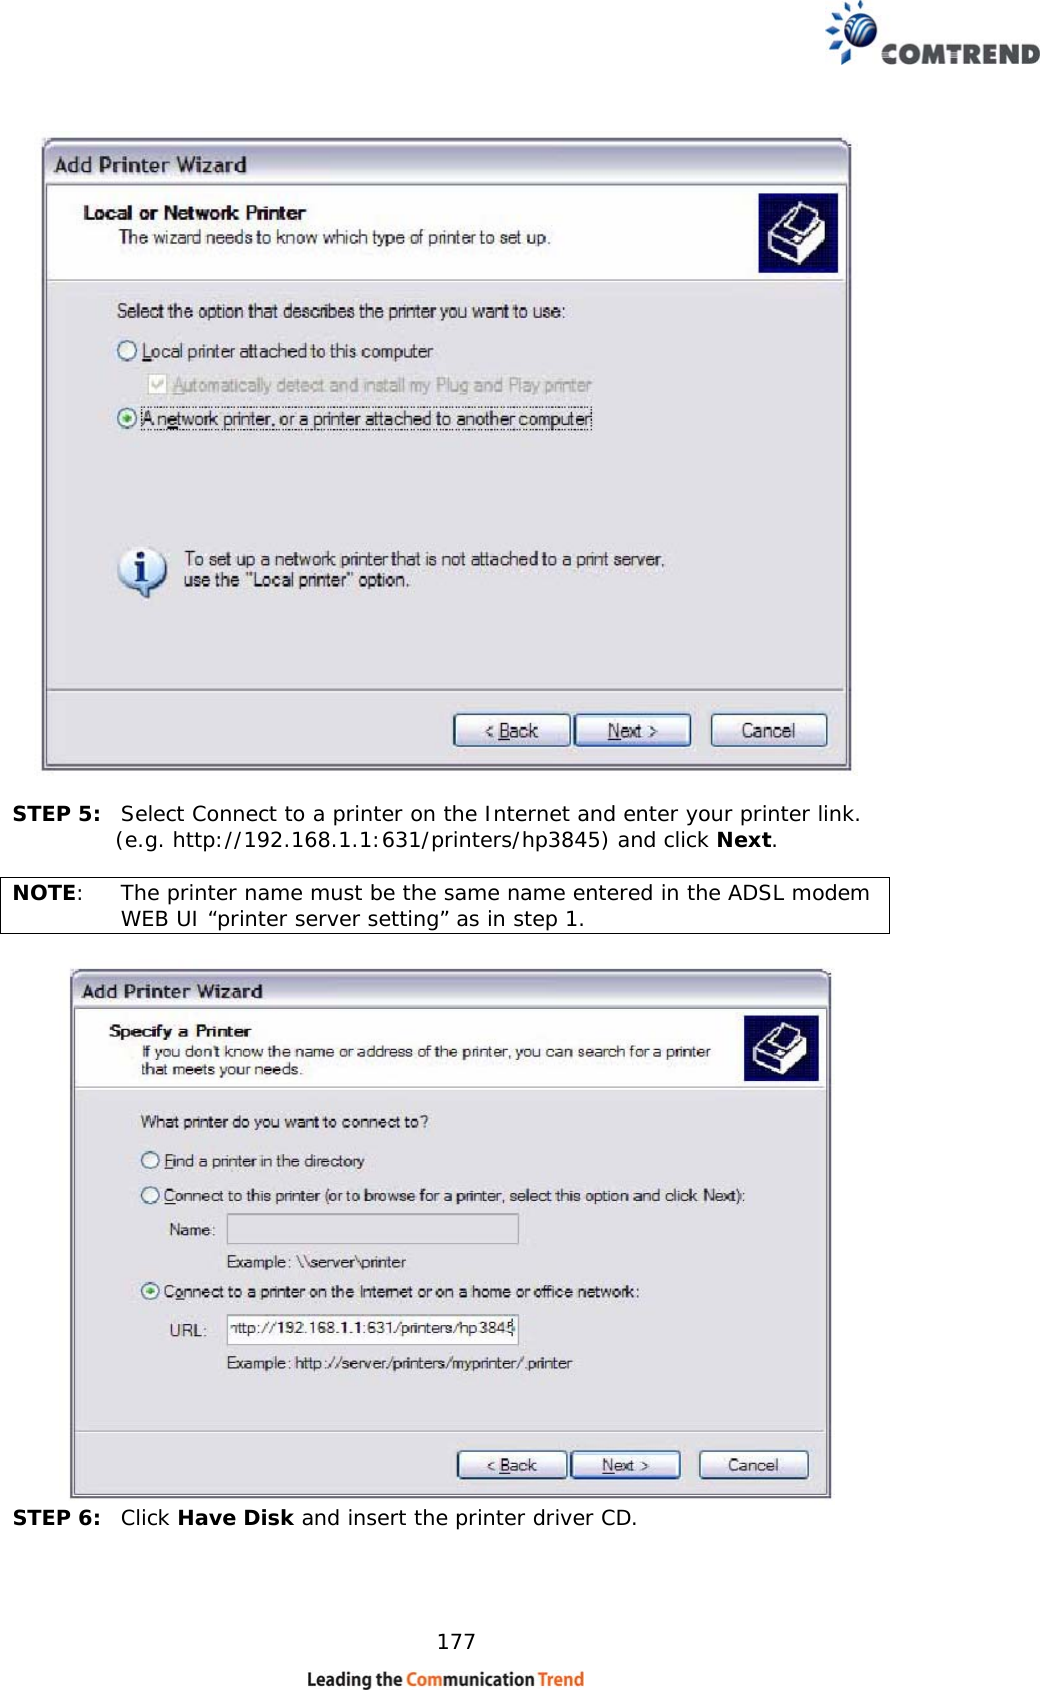    177   STEP 5:  Select Connect to a printer on the Internet and enter your printer link.   (e.g. http://192.168.1.1:631/printers/hp3845) and click Next.    NOTE:   The printer name must be the same name entered in the ADSL modem WEB UI “printer server setting” as in step 1.   STEP 6:  Click Have Disk and insert the printer driver CD.  